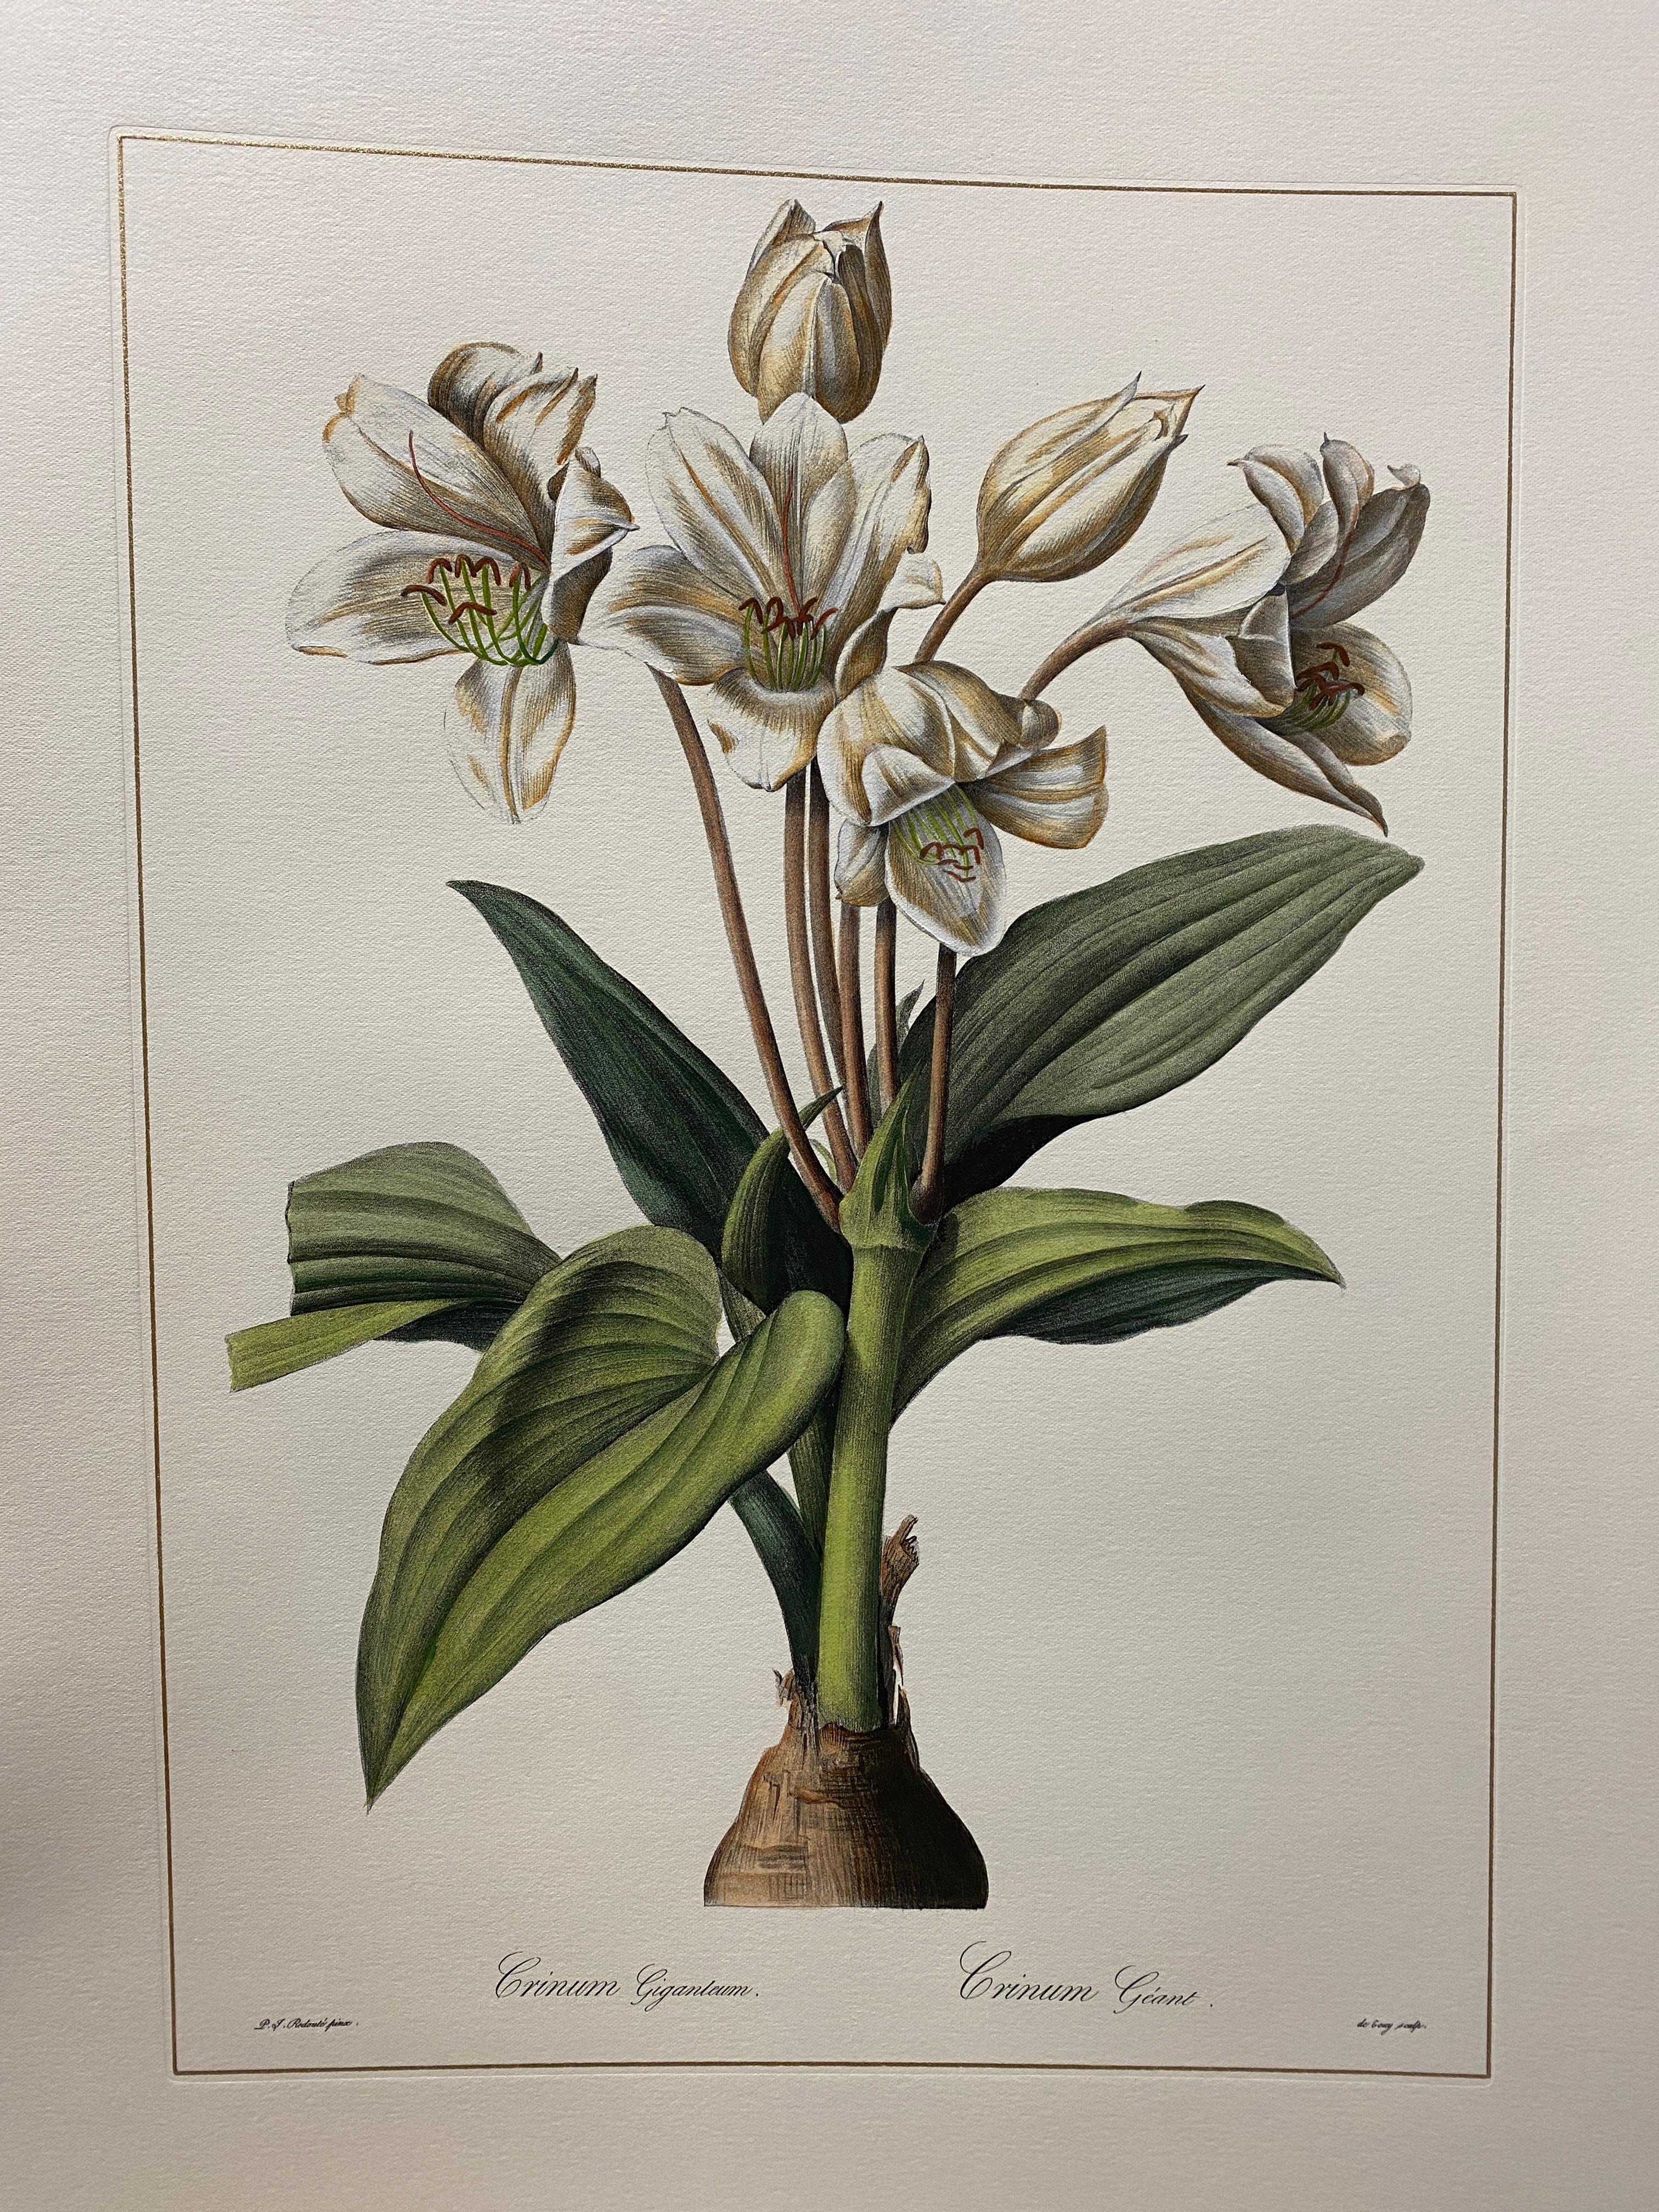 Print from the Collection Botanique representing Crinum Gigantum.
Another different Crinum prints are available to create a colourful composition. Crinum Erubescens.

All the prints are completely hand-coloured by our skilled craftsmen in Florence,